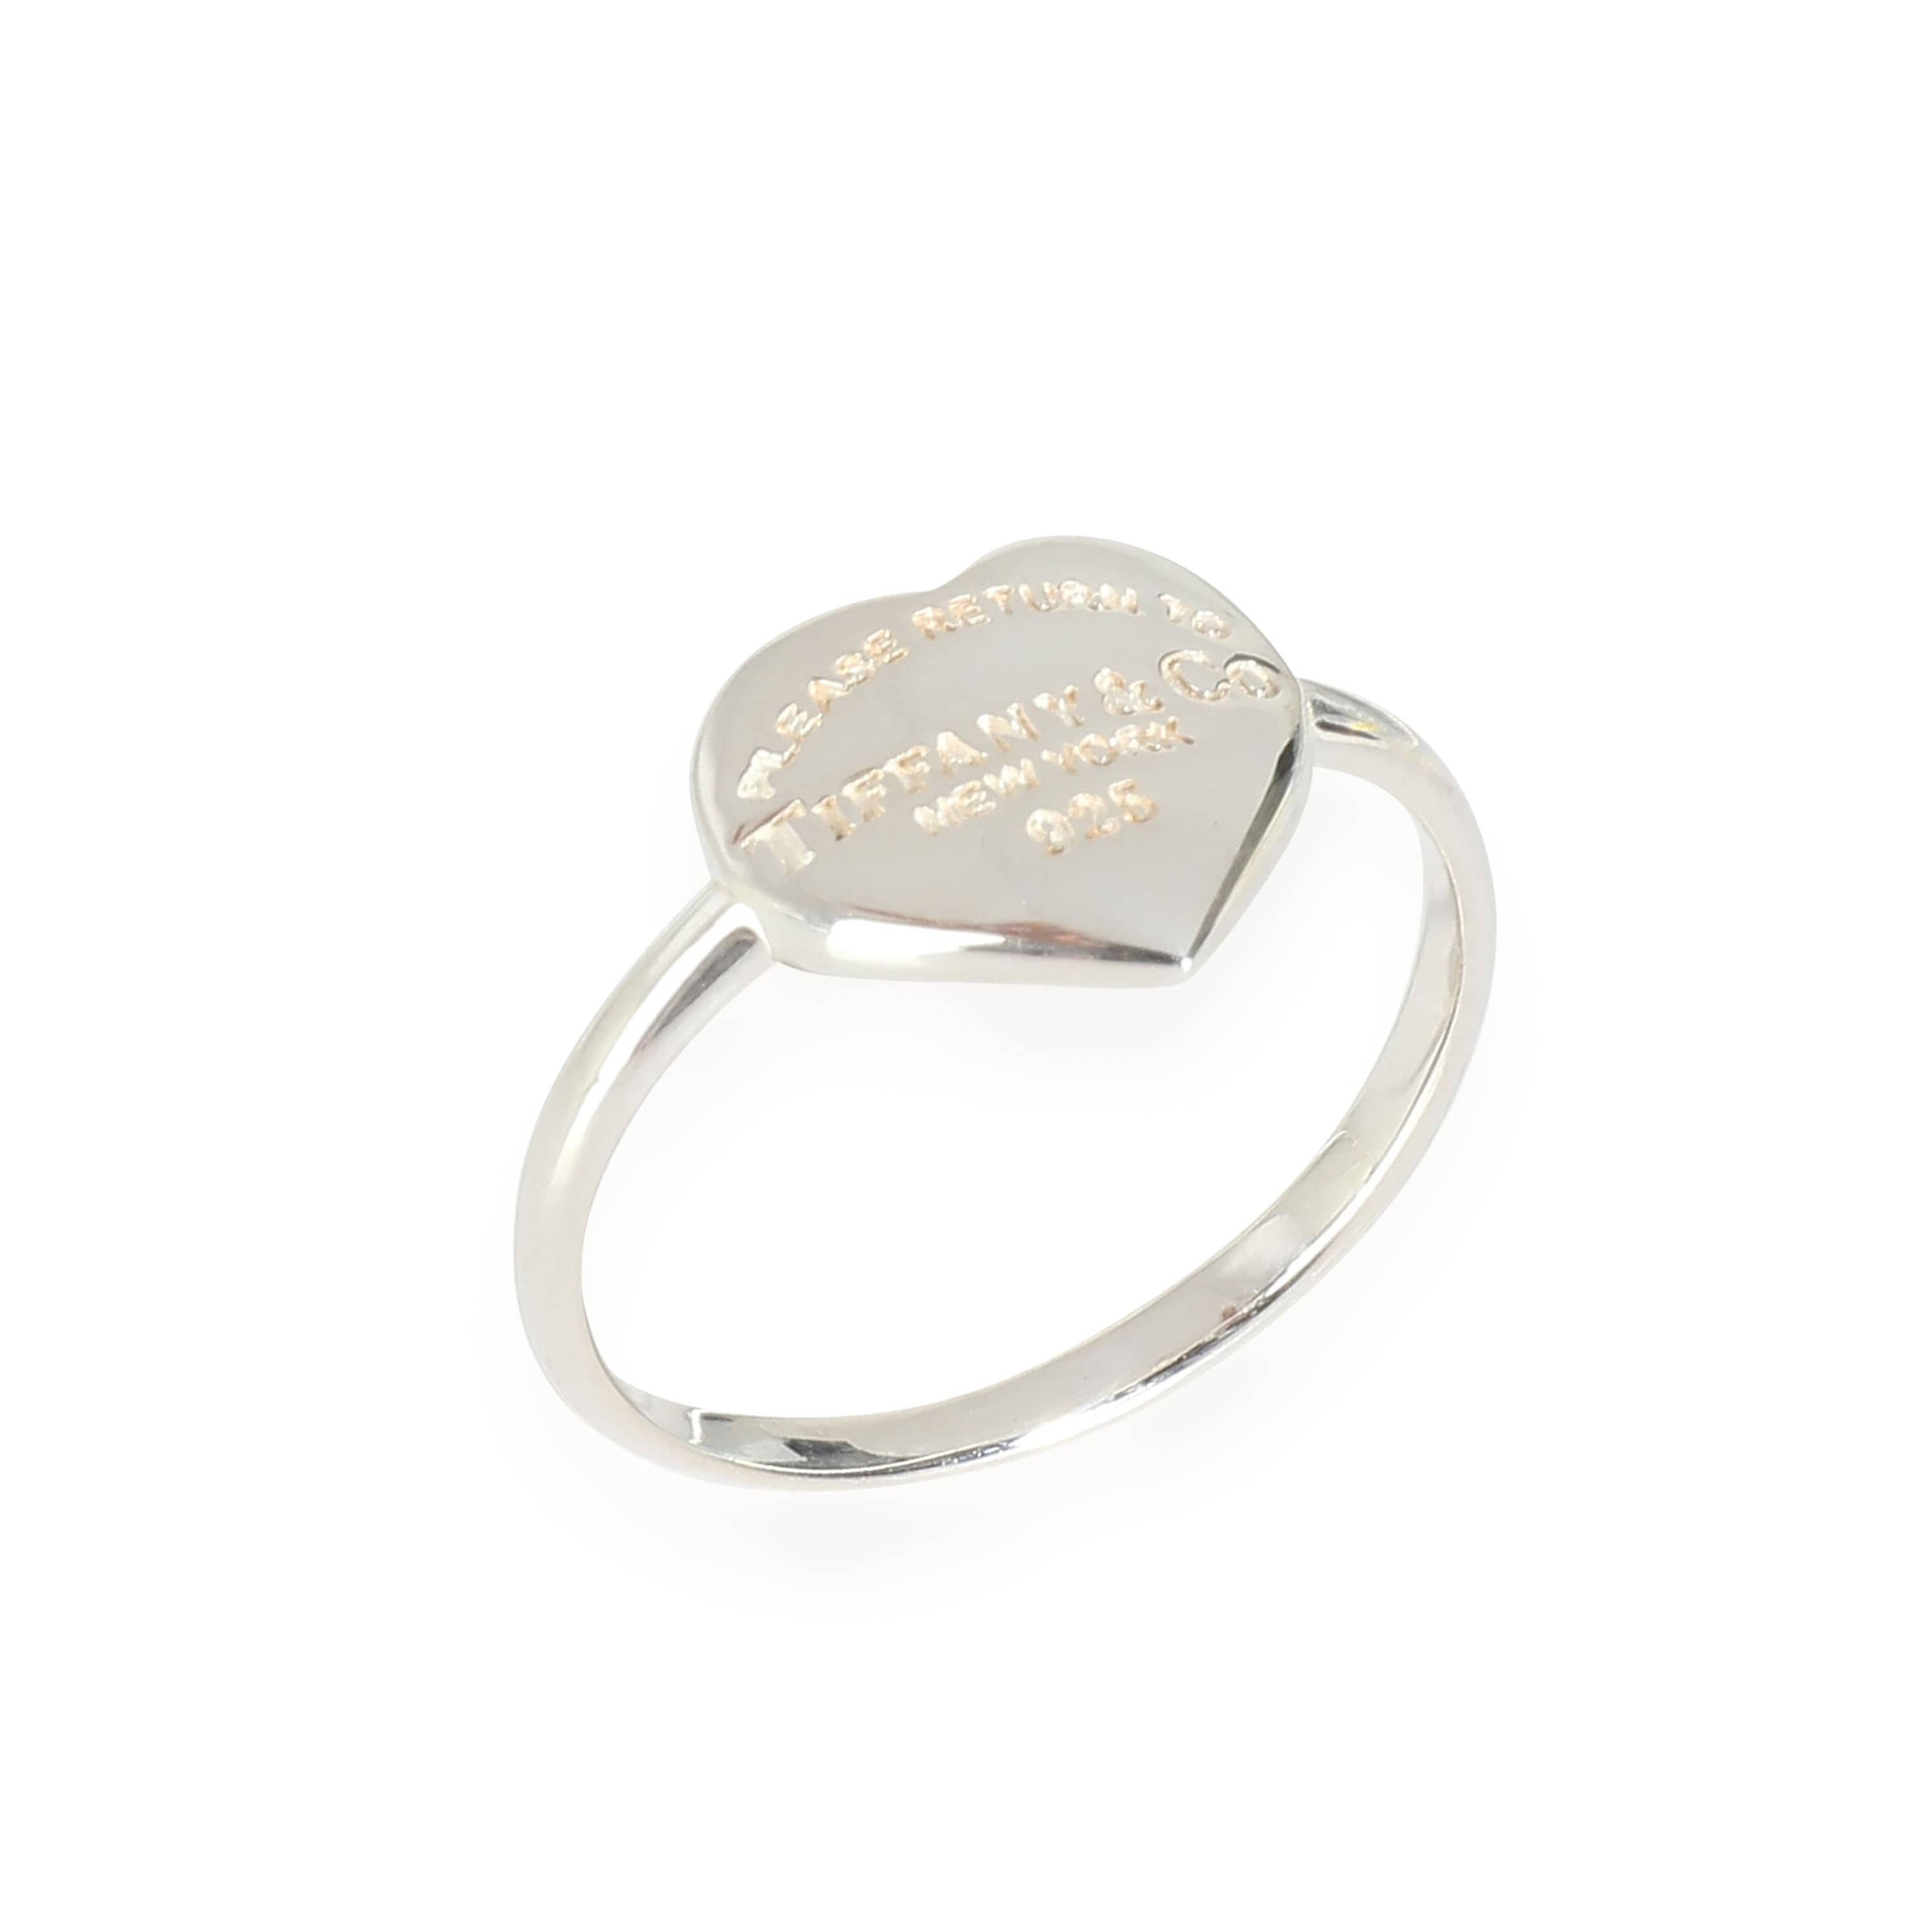 Tiffany & Co. Return to Tiffany Ring in Sterling Silver